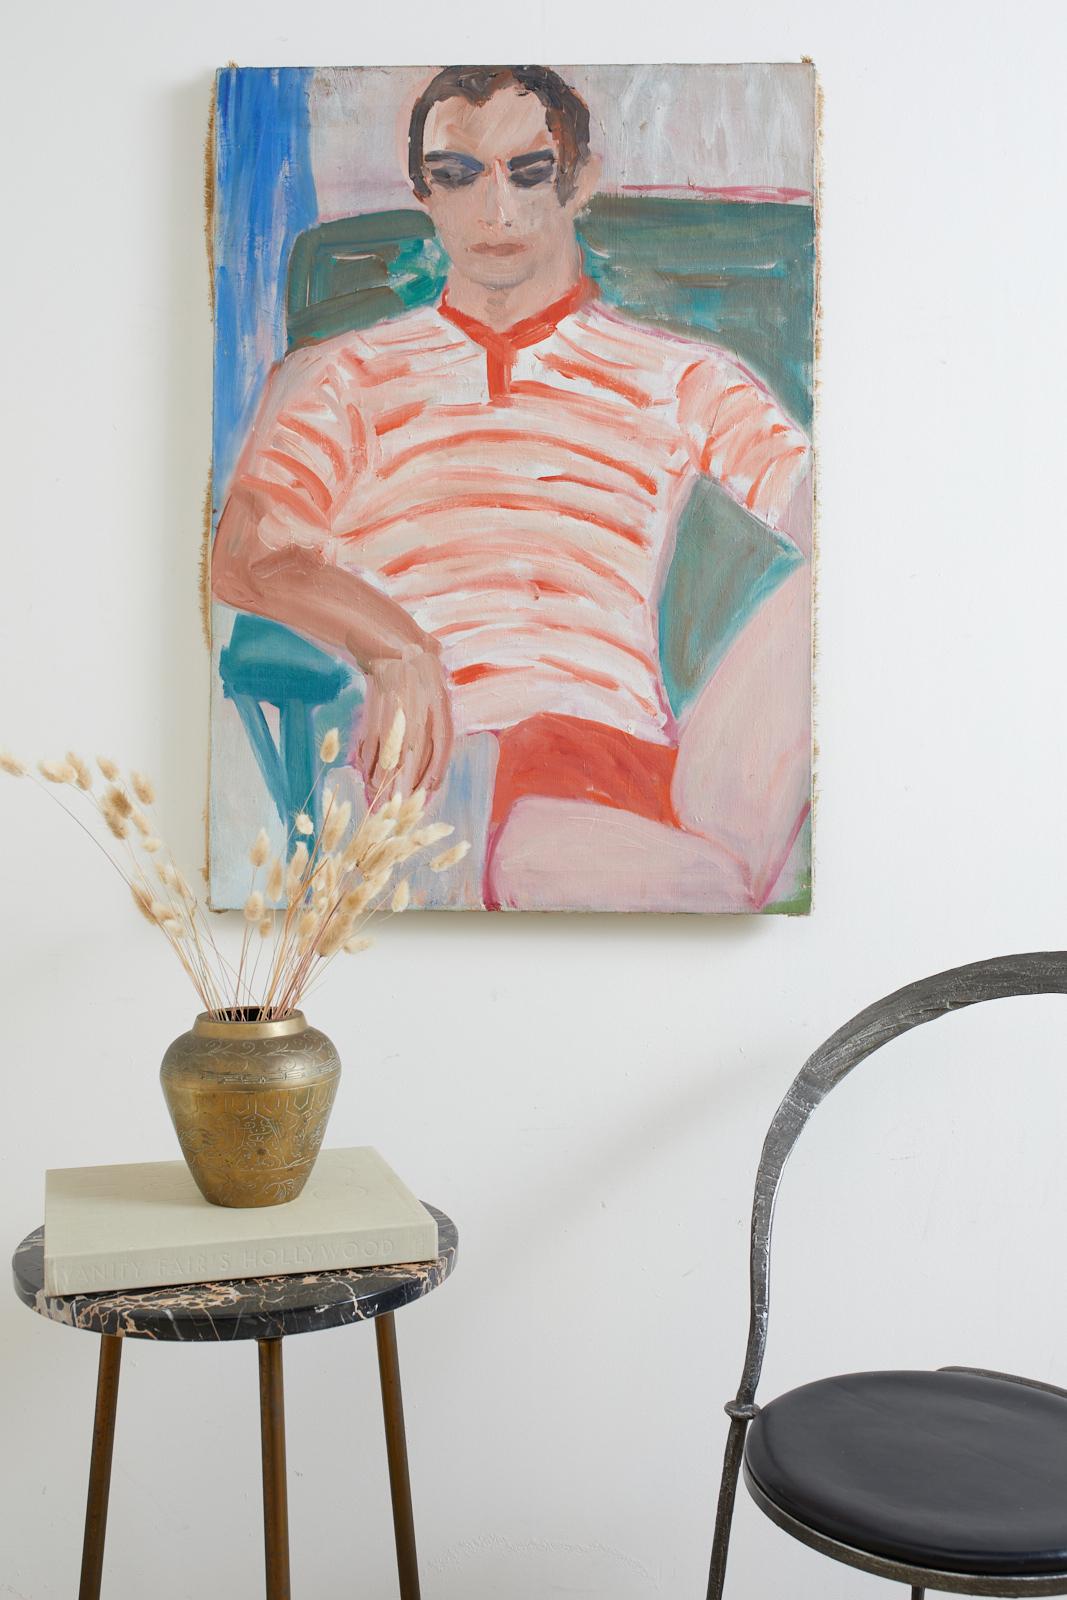 Charming Mid-Century Modern oil on canvas painting depicting a young man in a lounge chair at a beach house. Colorful Expressionist piece using thick brush strokes. Unframed canvas. From an estate in Malibu, CA.